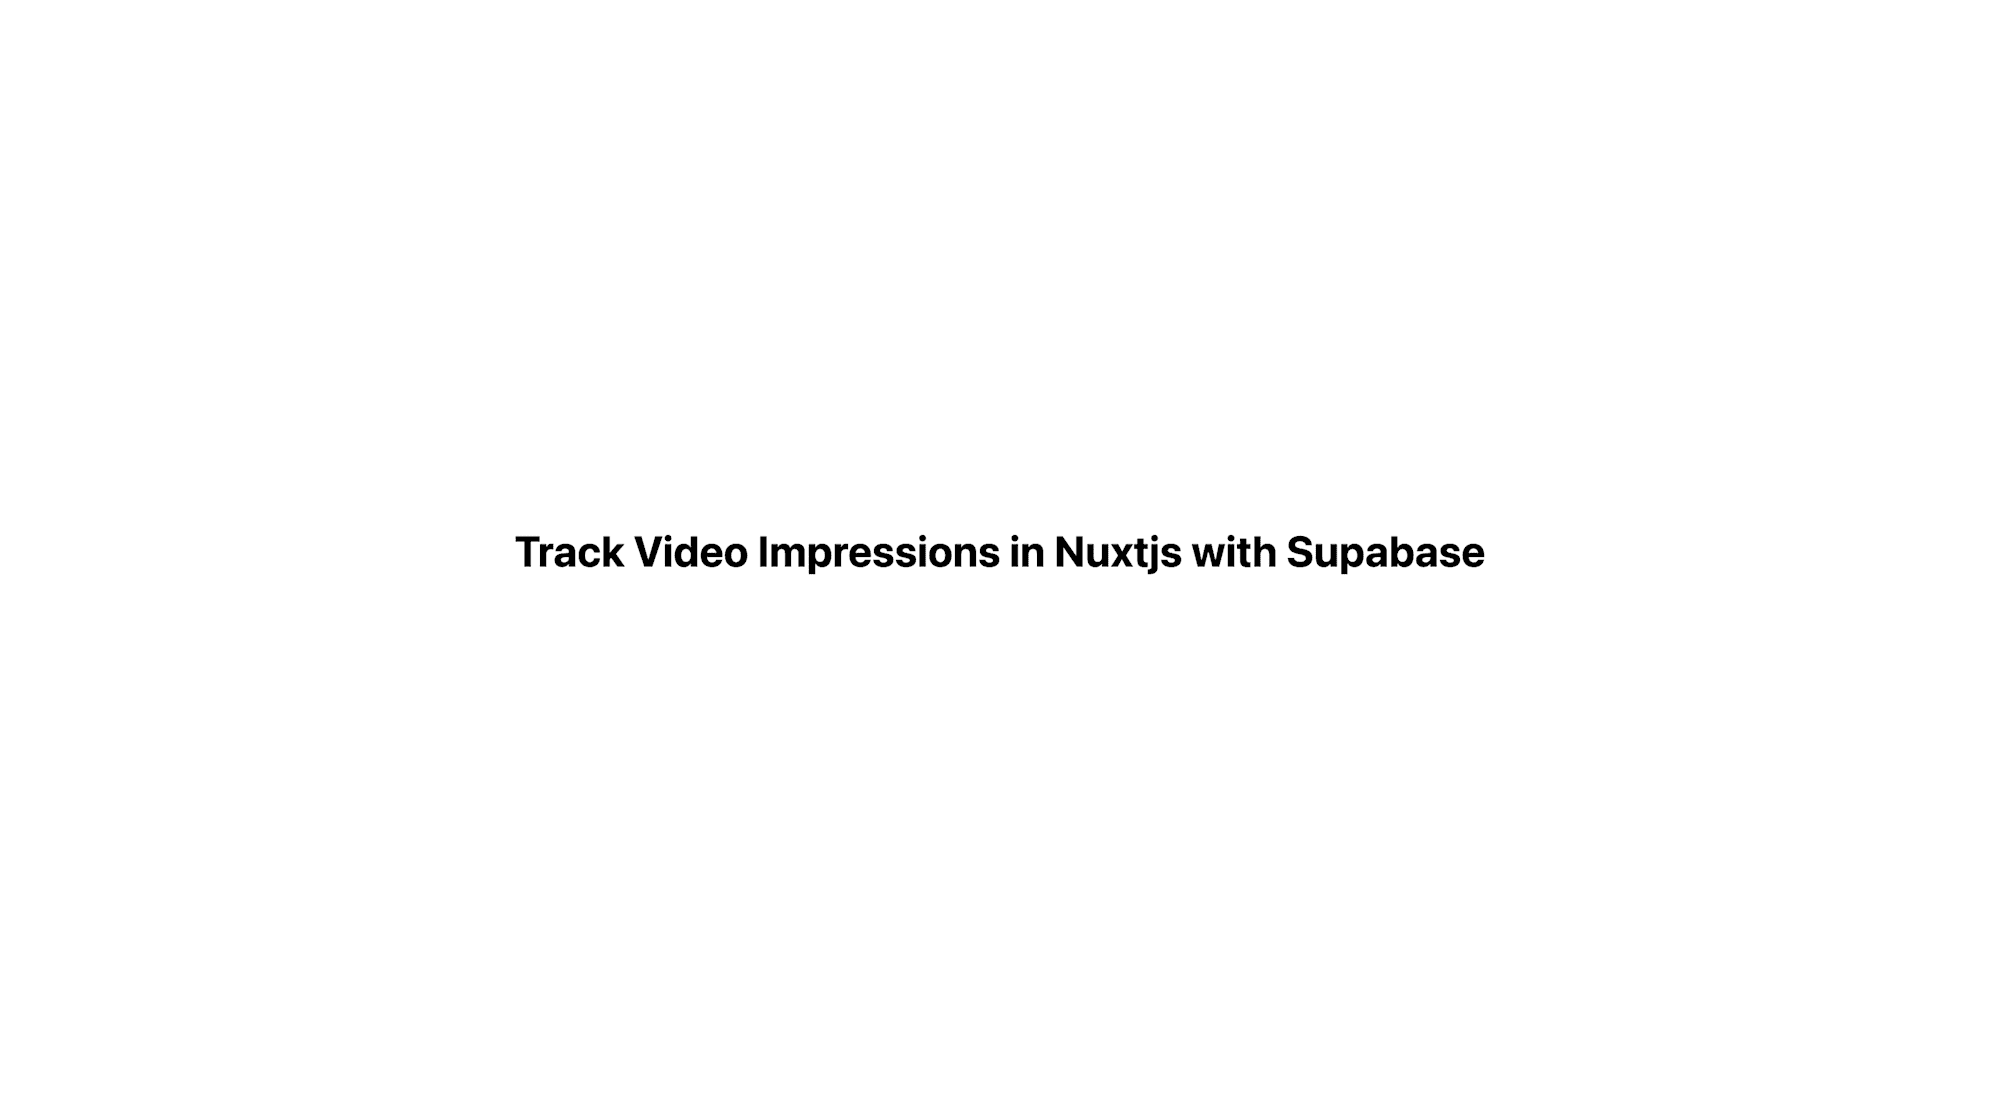 Track Video Impressions in Nuxtjs with Supabase